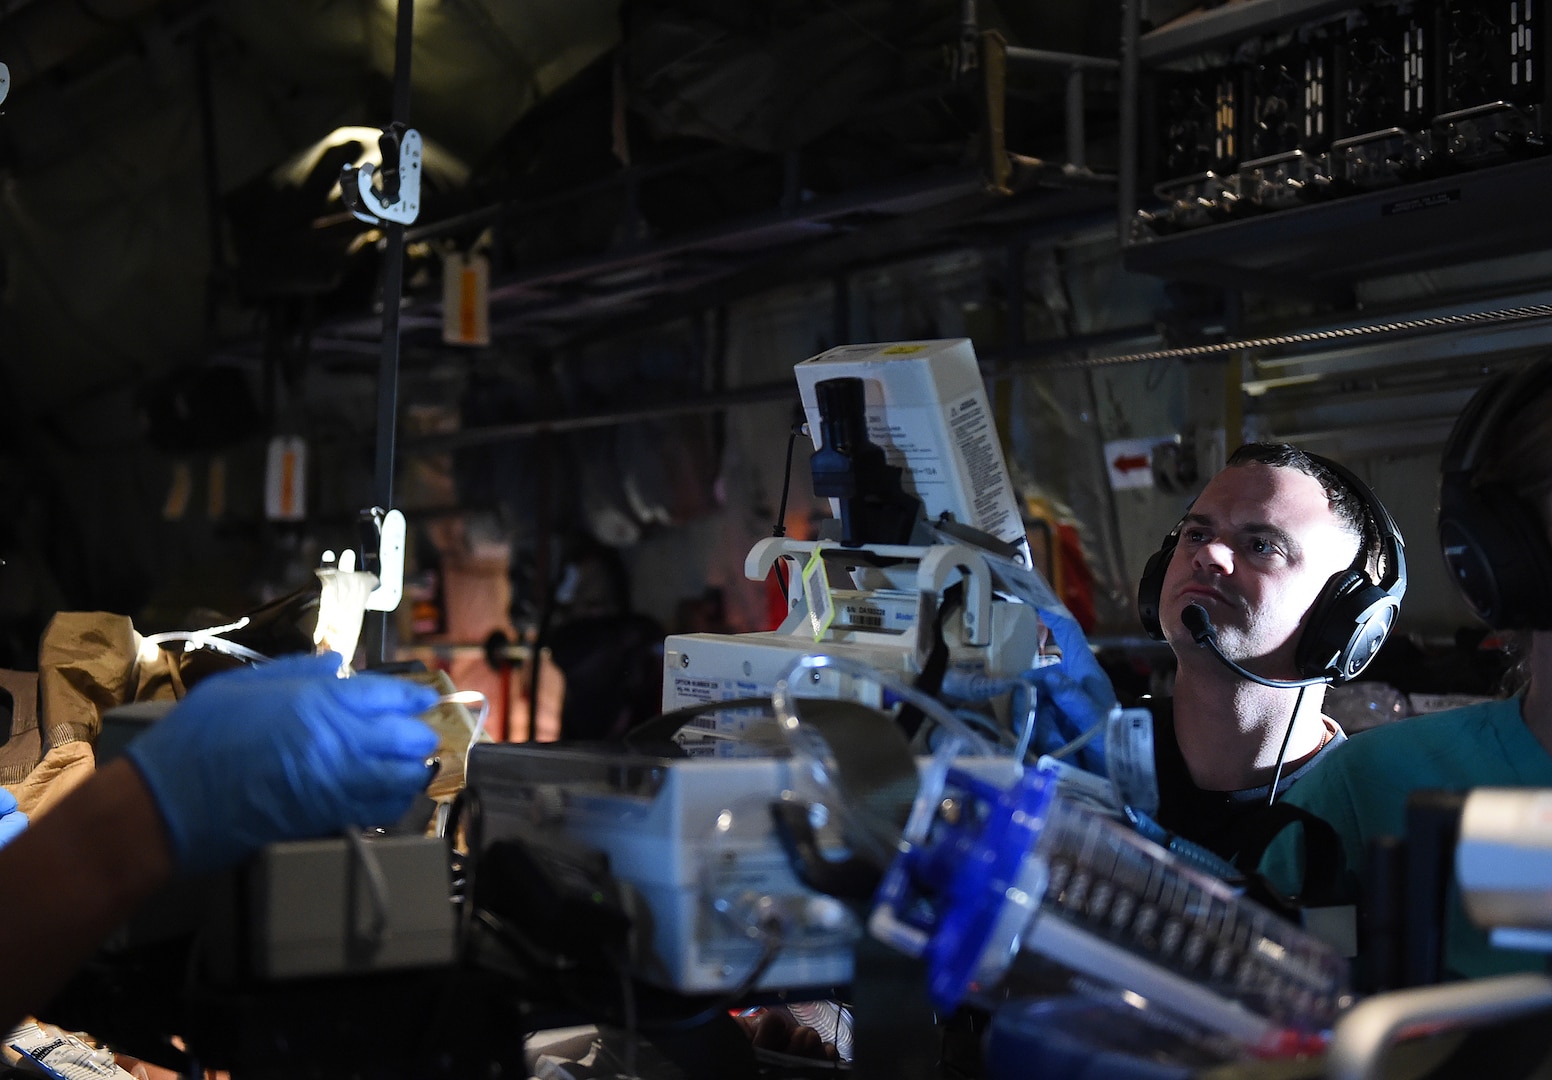 U.S. Air Force 1st Lt. Joseph Acquafredda, a 59th Medical Wing extracorporeal membrane oxygenation specialist, monitors the patient during flight on board a C-130J Super Hercules, Feb. 16, 2017. Acquafredda was part of a 9-person medical team tasked to transport a critically-ill patient from South America back to the U.S. for care at the San Antonio Military Medical Center in San Antonio, Texas. (U.S. Air Force photo/Staff Sgt. Jerilyn Quintanilla)